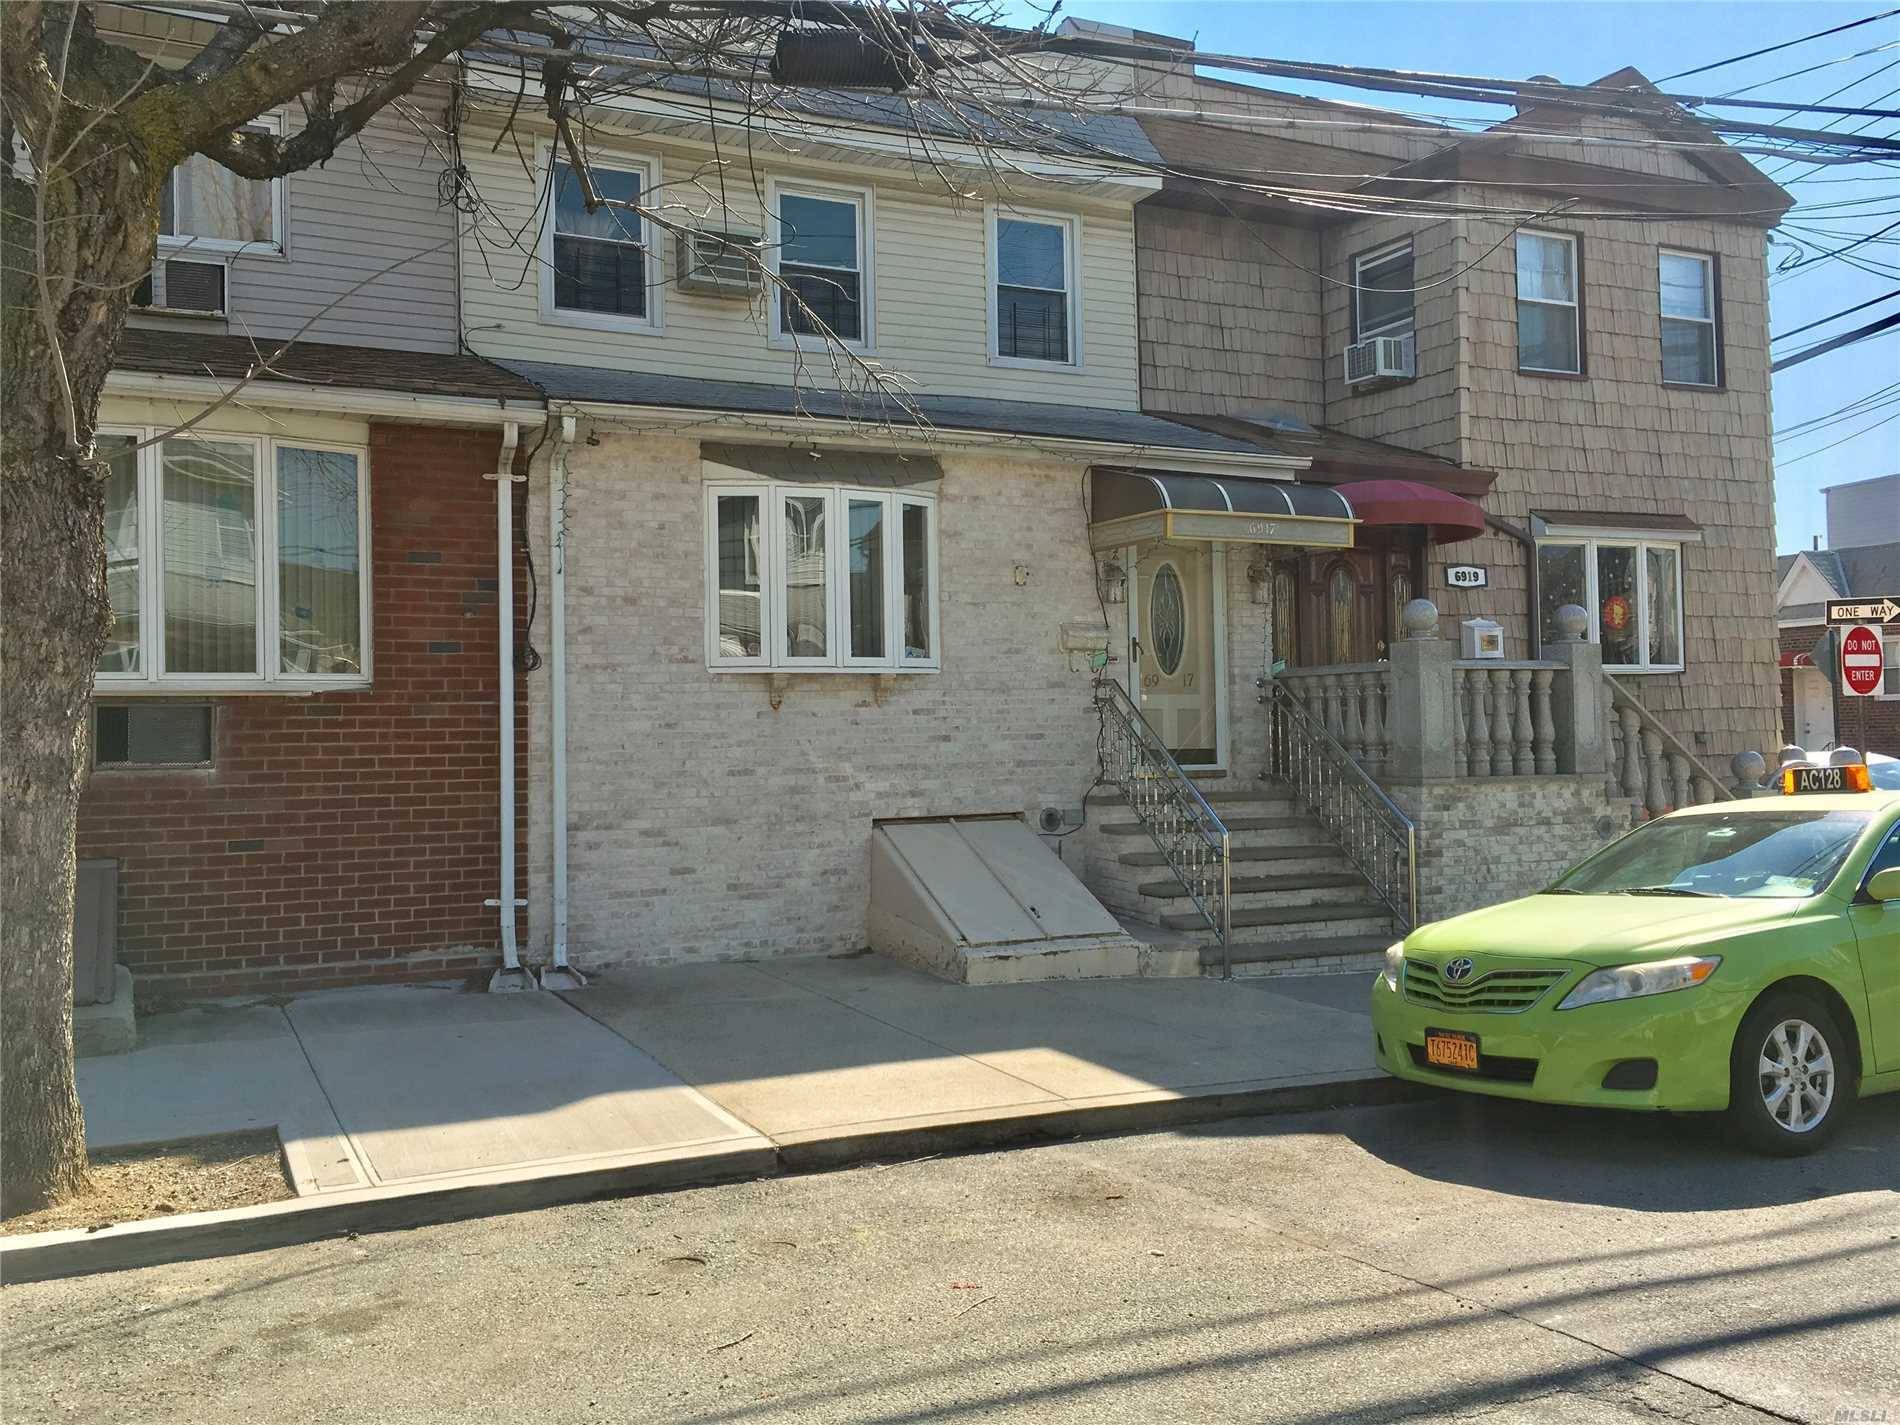 2 family for sale in Middle Village.